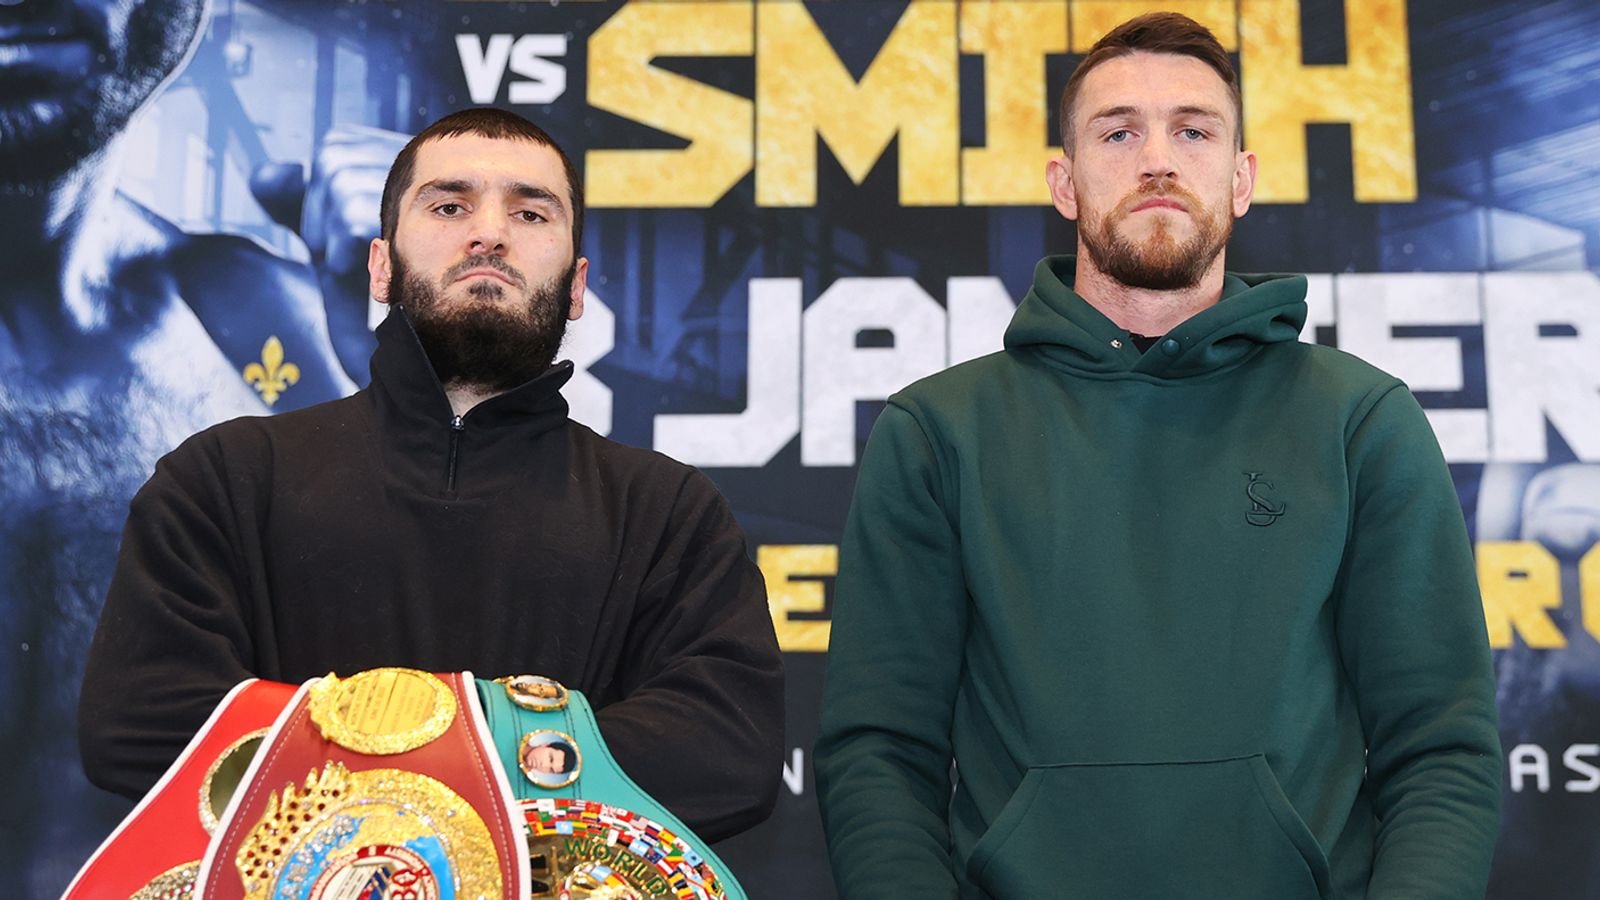 Callum Smith on Artur Beterbiev making three crucial mistakes going into their unified WBC, IBF and WBO title fight | Boxing News